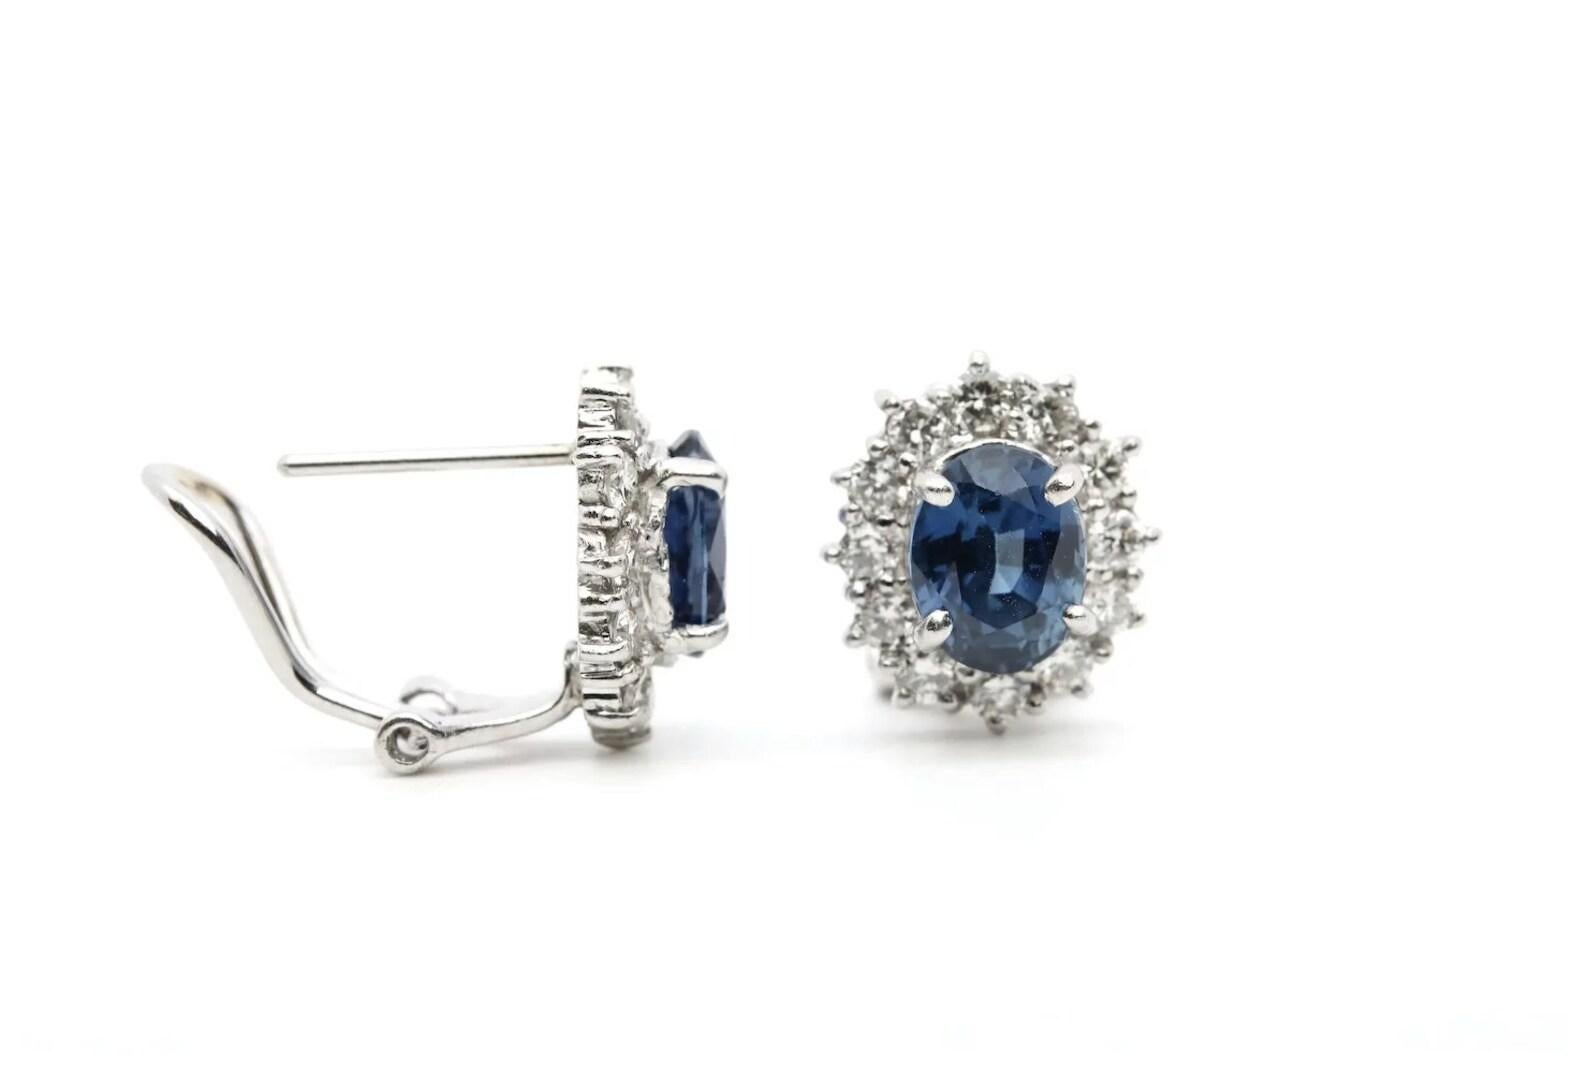 A pair of beautiful Ceylon sapphire, and diamond earrings in platinum. Centered by two vivid blue Ceylon sapphires of VS clarity weighing a combined 3.40 carats. Encircling the sapphires are a total of 24 sparkling diamonds. The diamonds grade as G